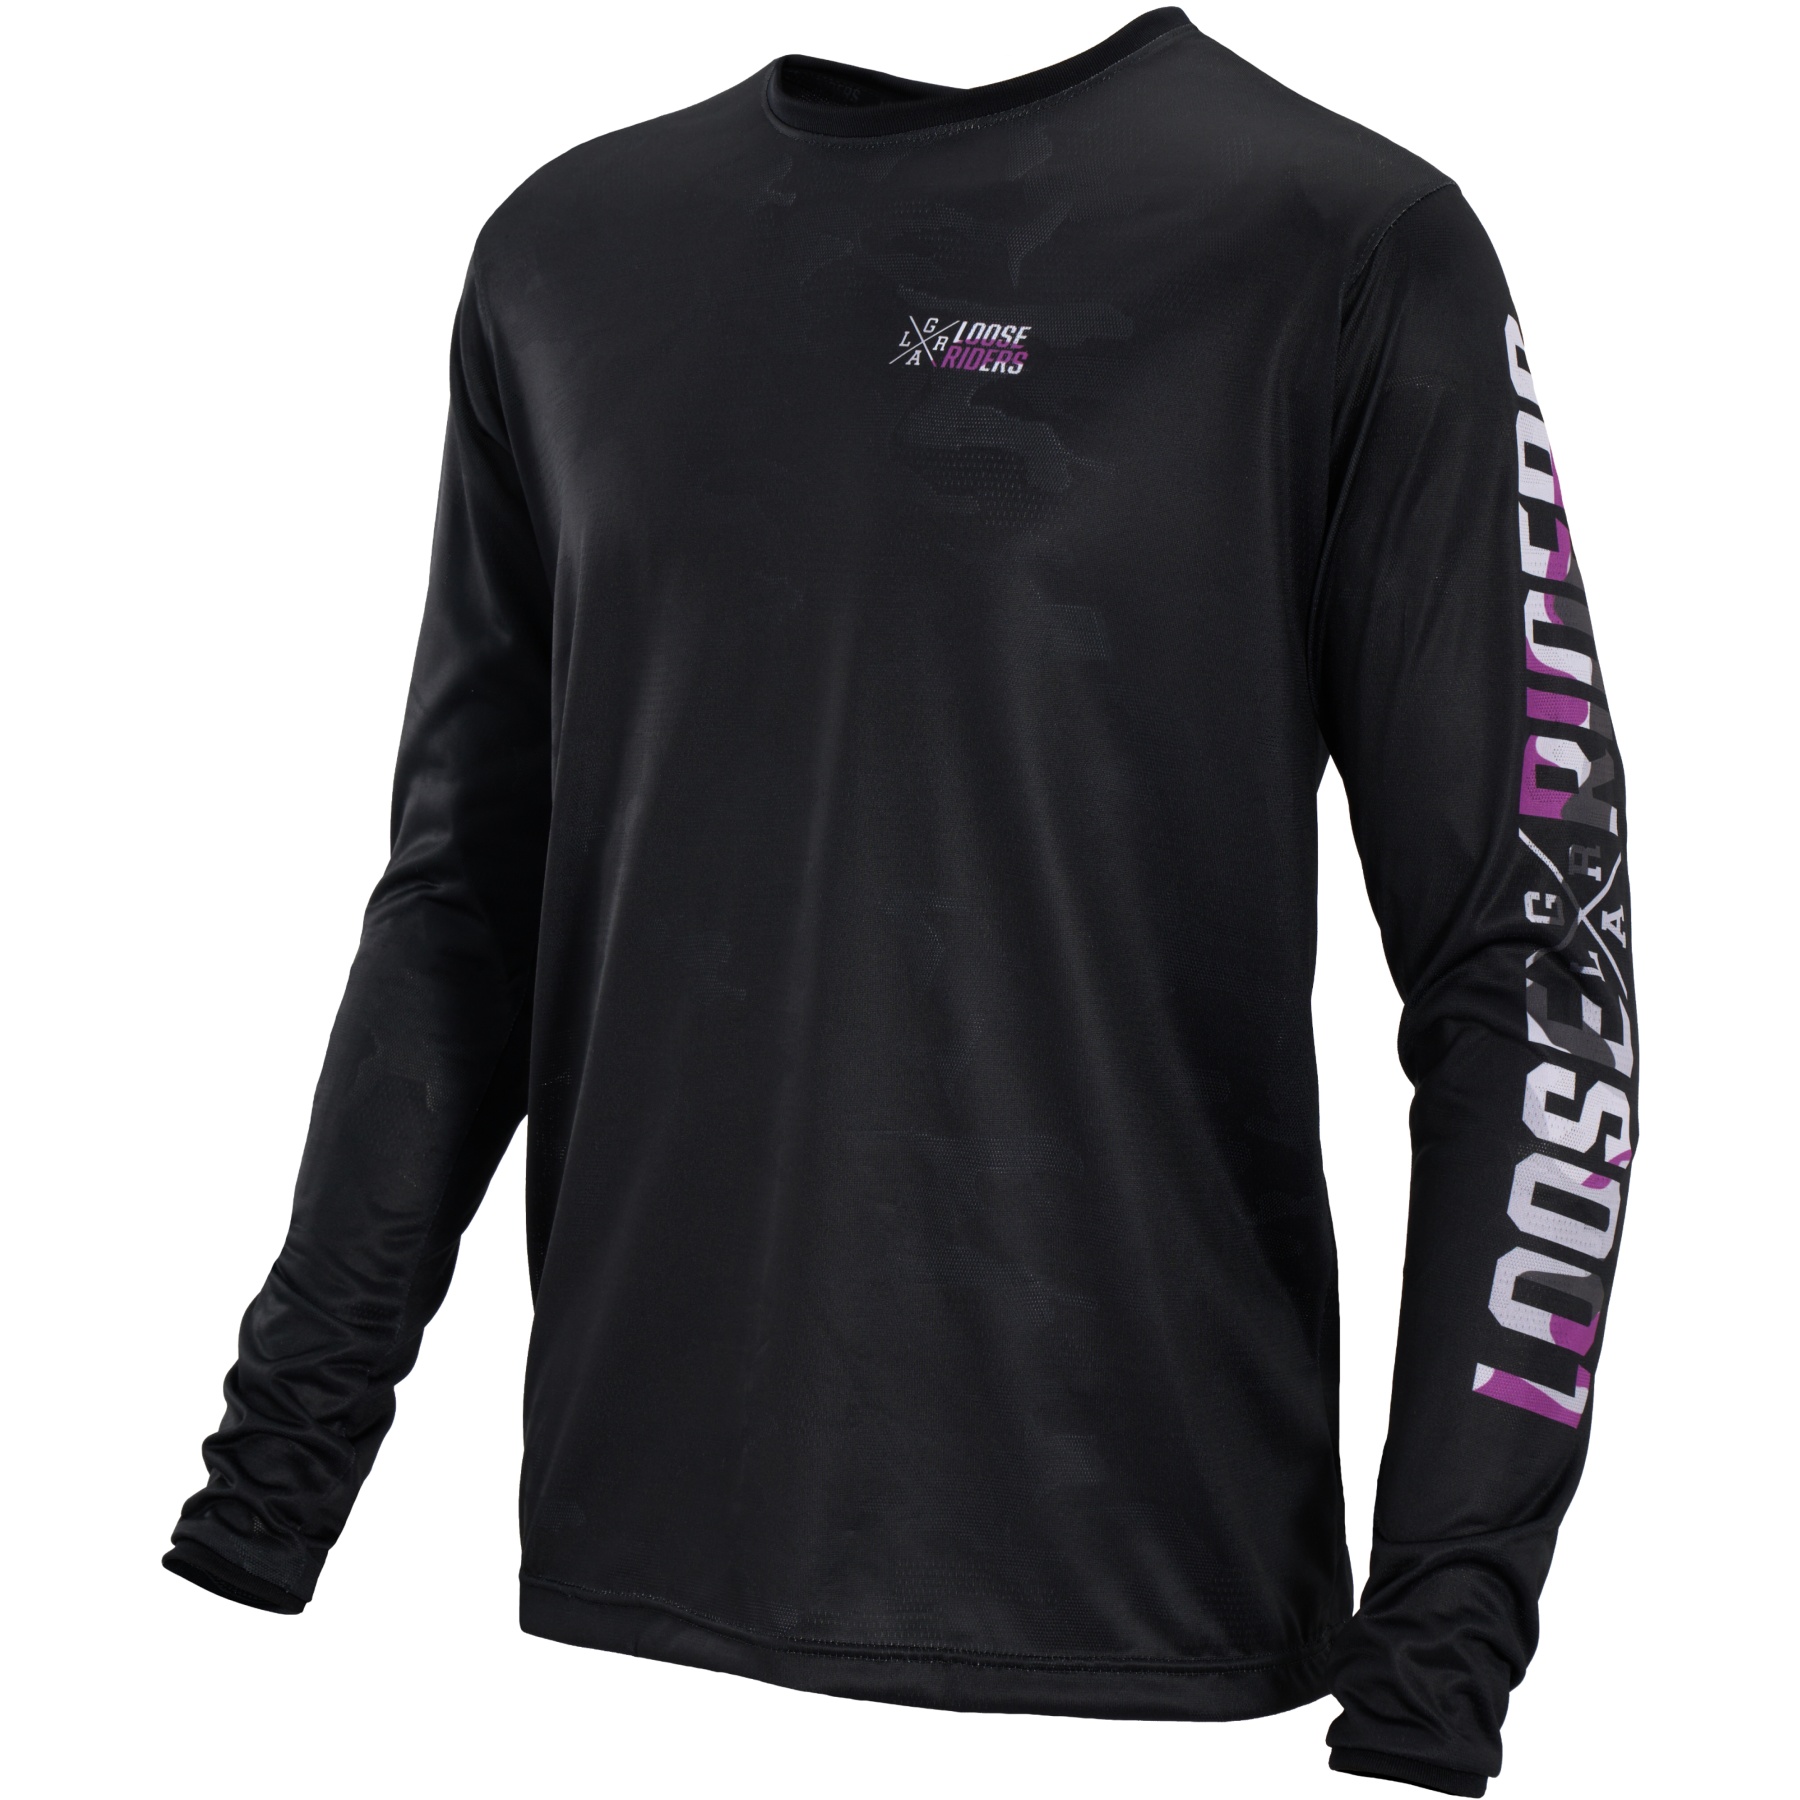 Picture of Loose Riders Cult of Shred Technical Long Sleeve Jersey - Purple Camo Black